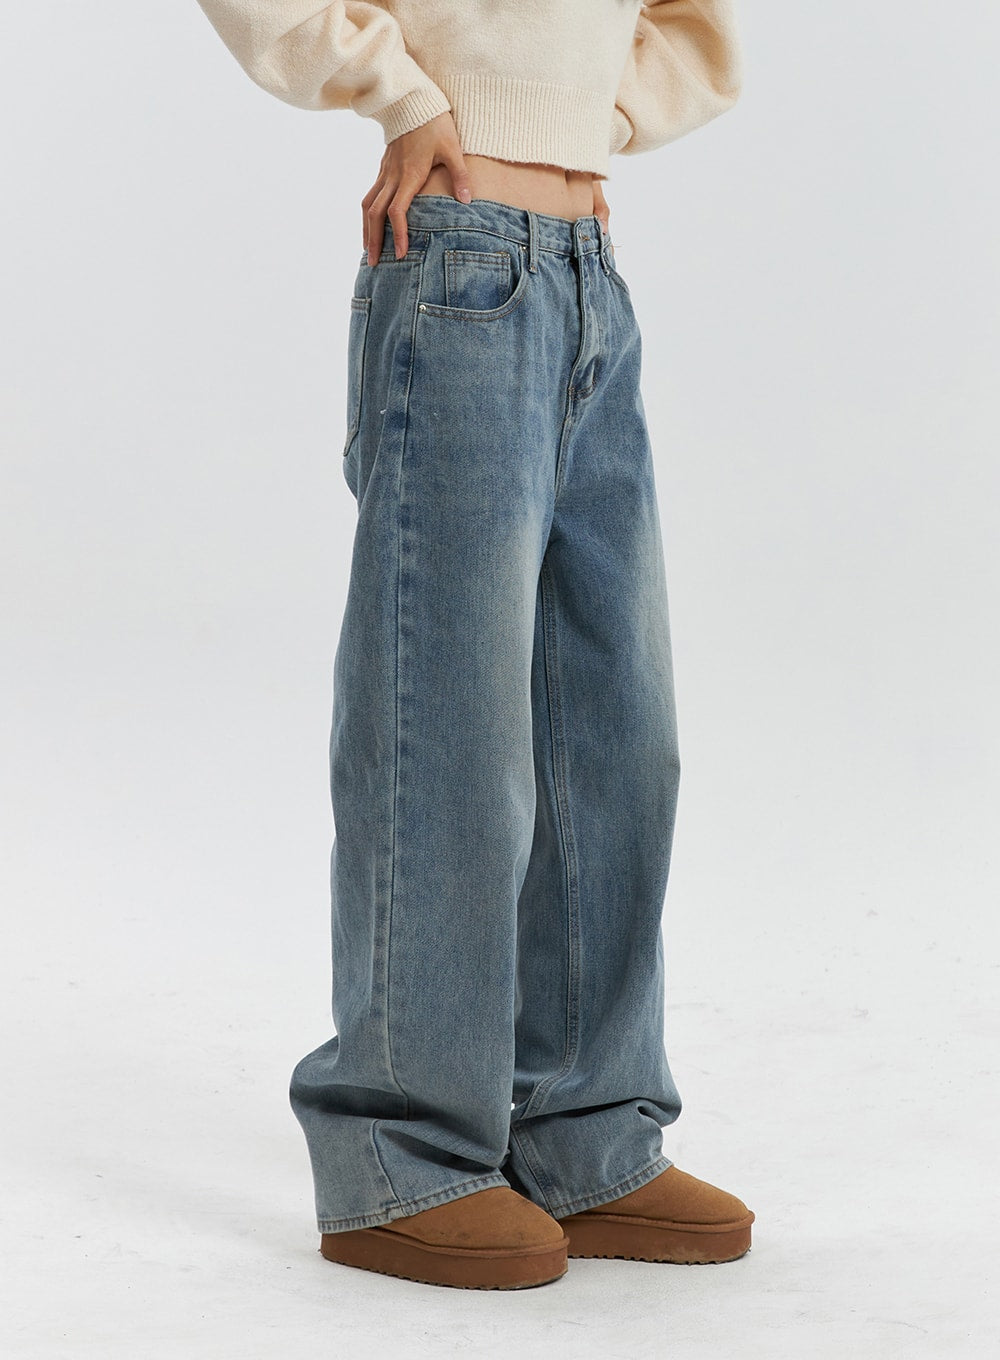 Wide Mid Washed Jeans Button Waist OD320 Leg